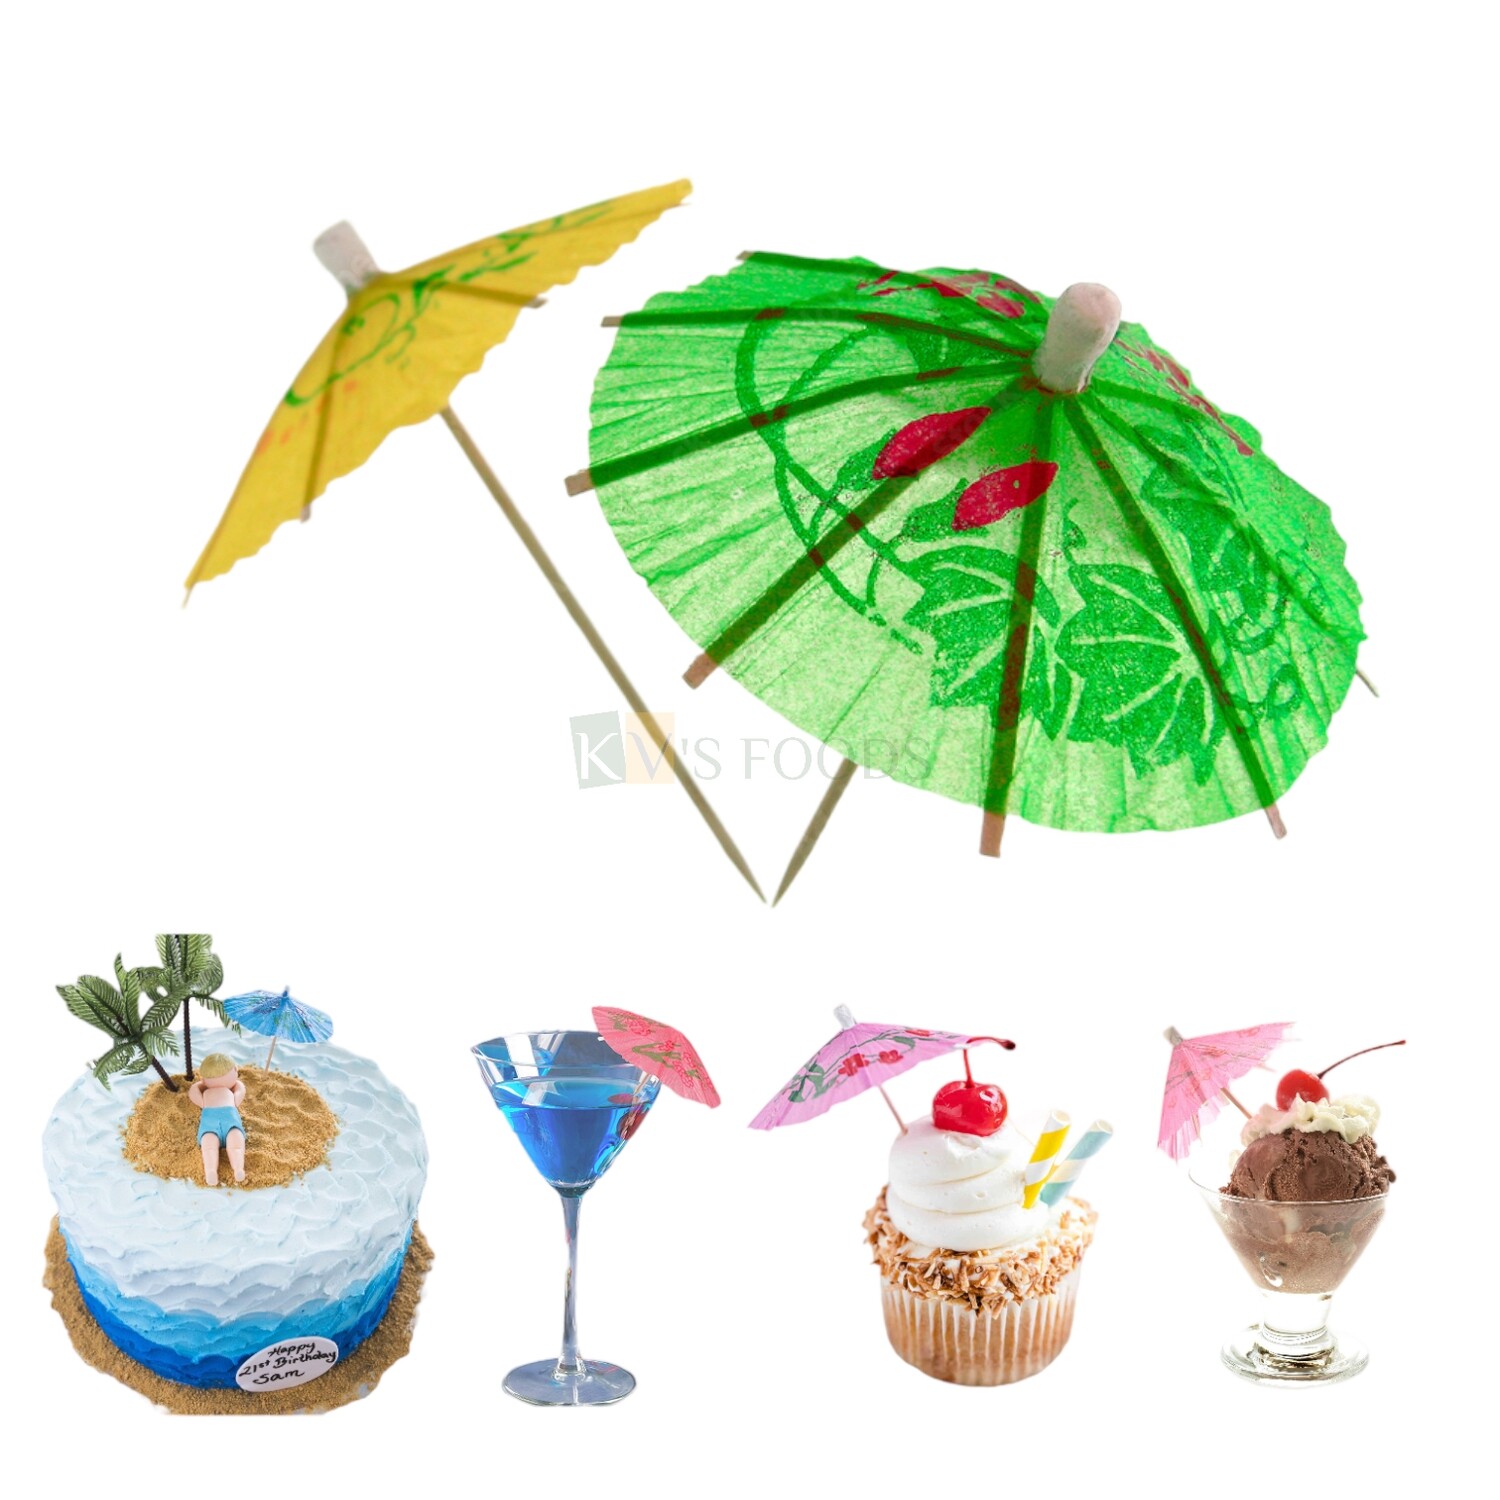 10 Pcs Beach Trip Picnic Theme Cake Topper Cocktail, Mocktail Paper Tropical Umbrella Parasols Drink Fancy ToothPick Sticks Multi-color Cake Topper Insert, Cupcake Toppers,Cake Accessories/ Decoration